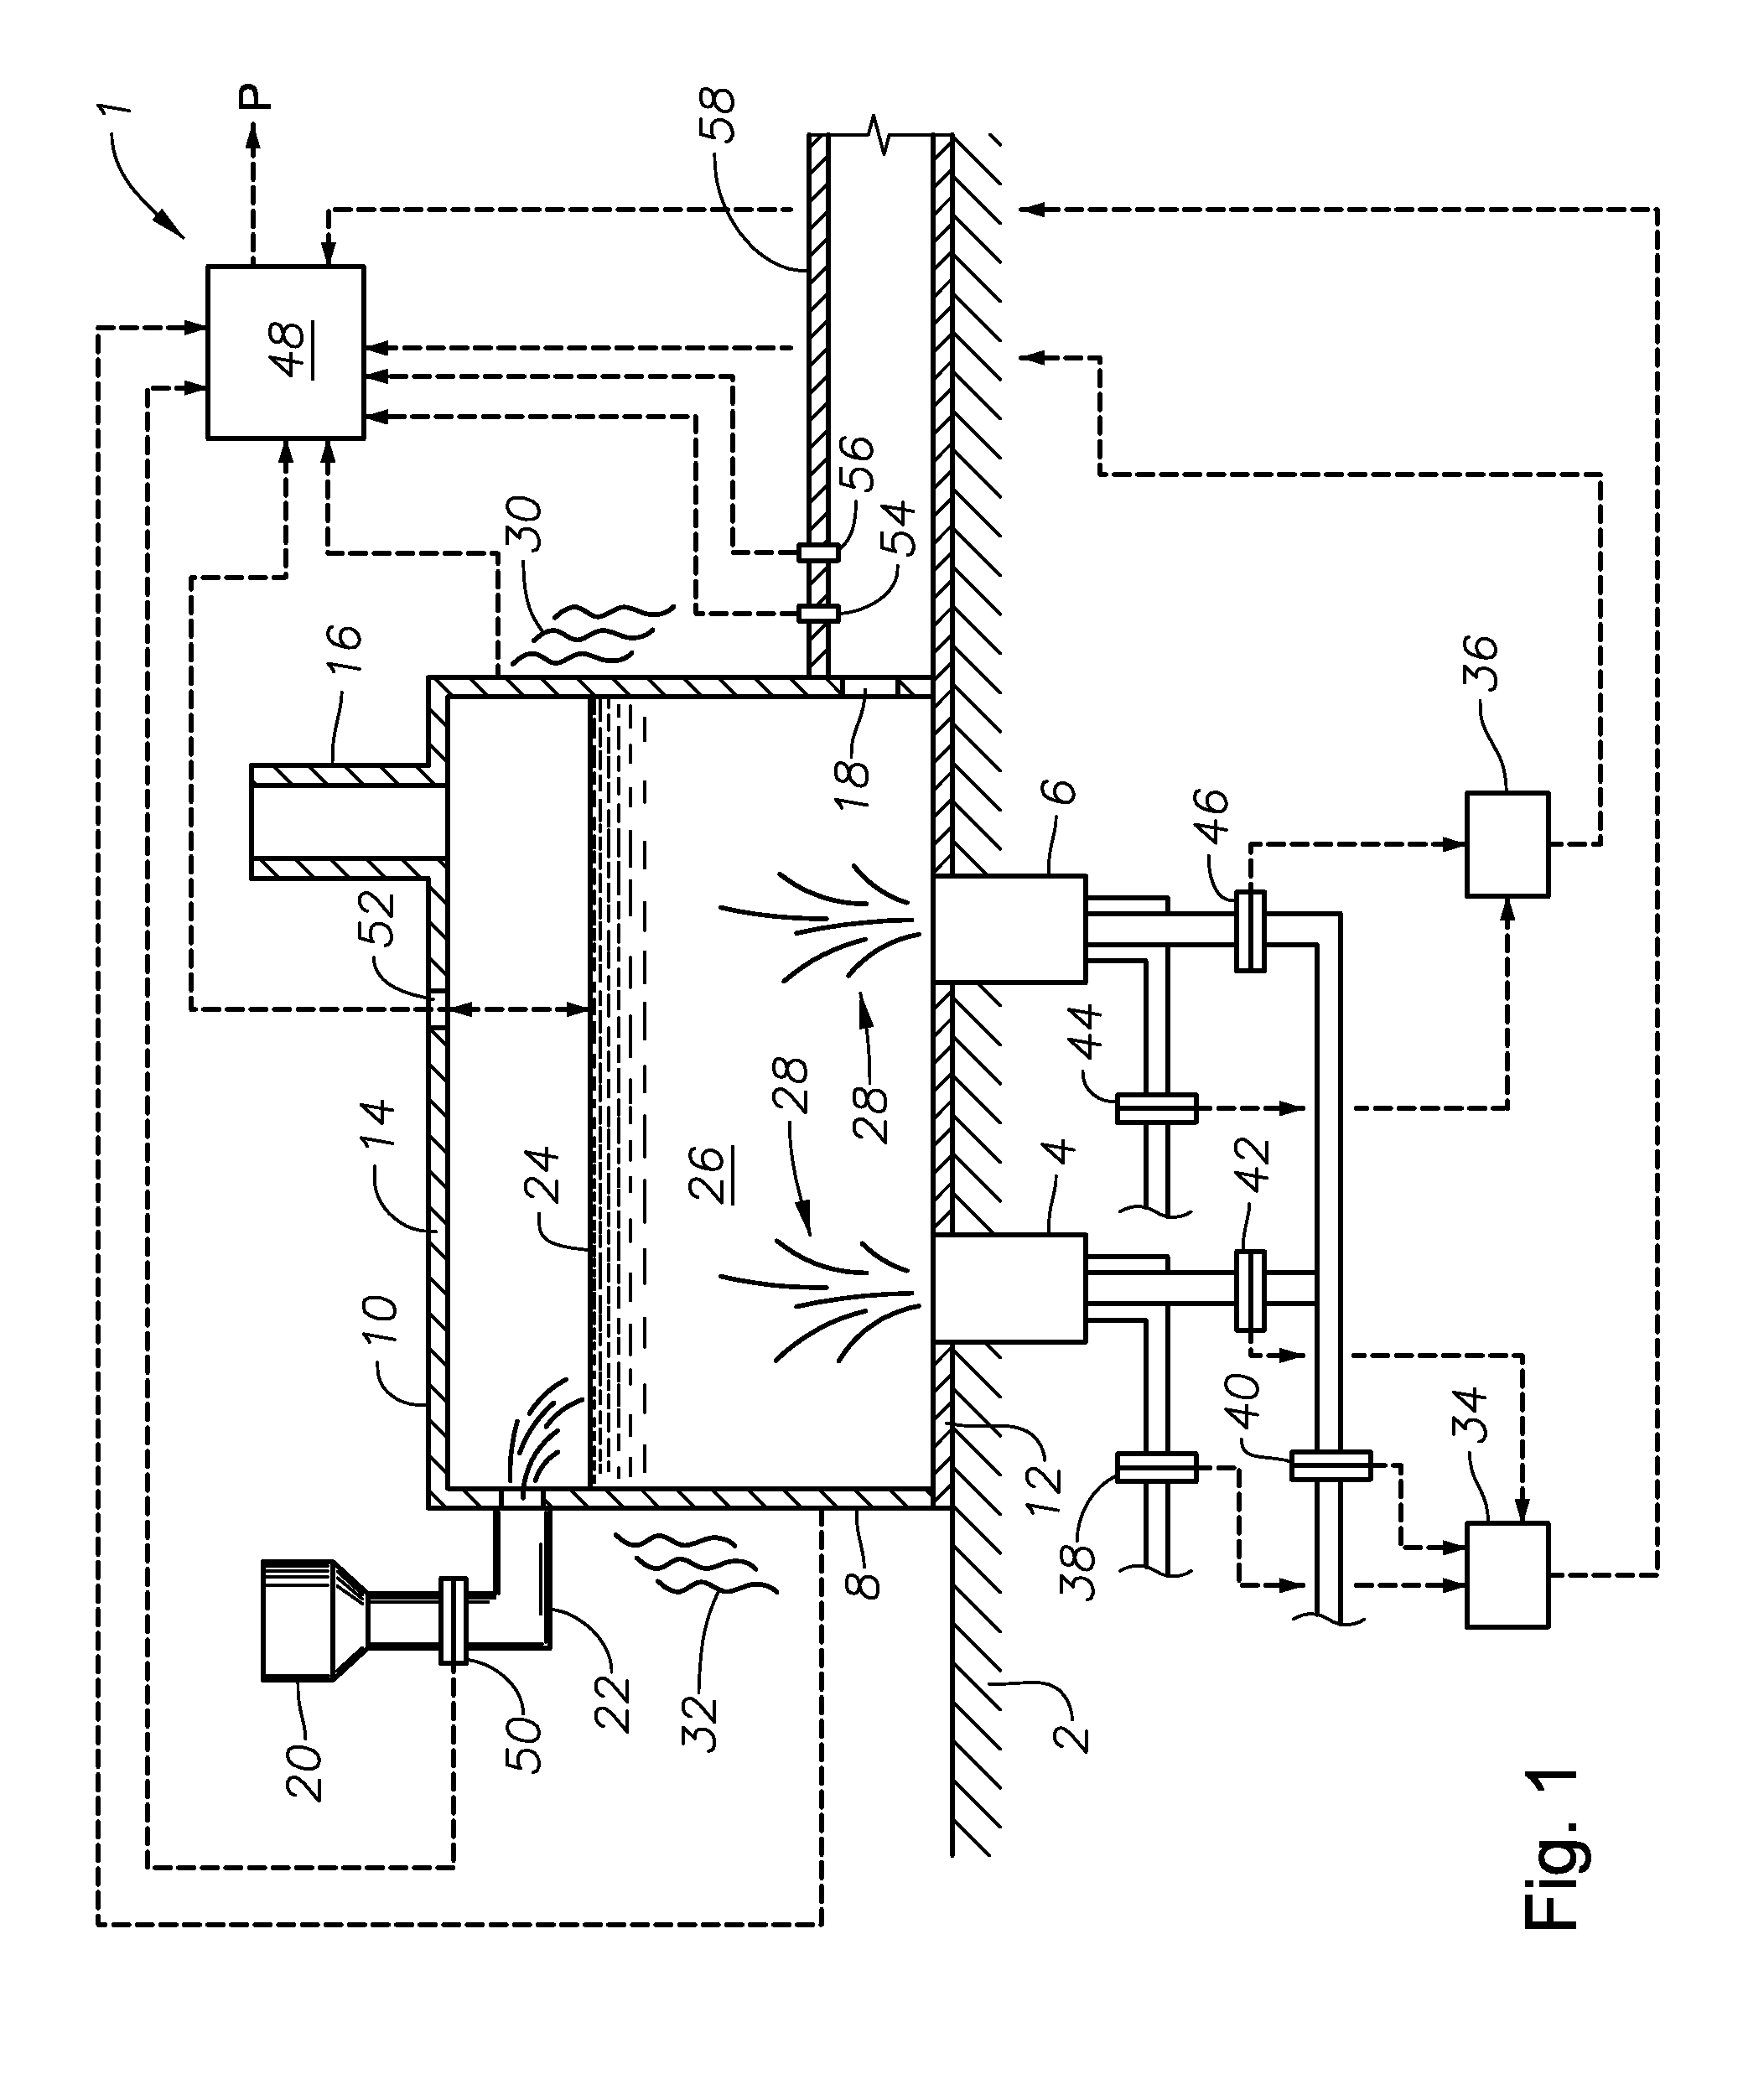 Methods of using a submerged combustion melter to produce glass products